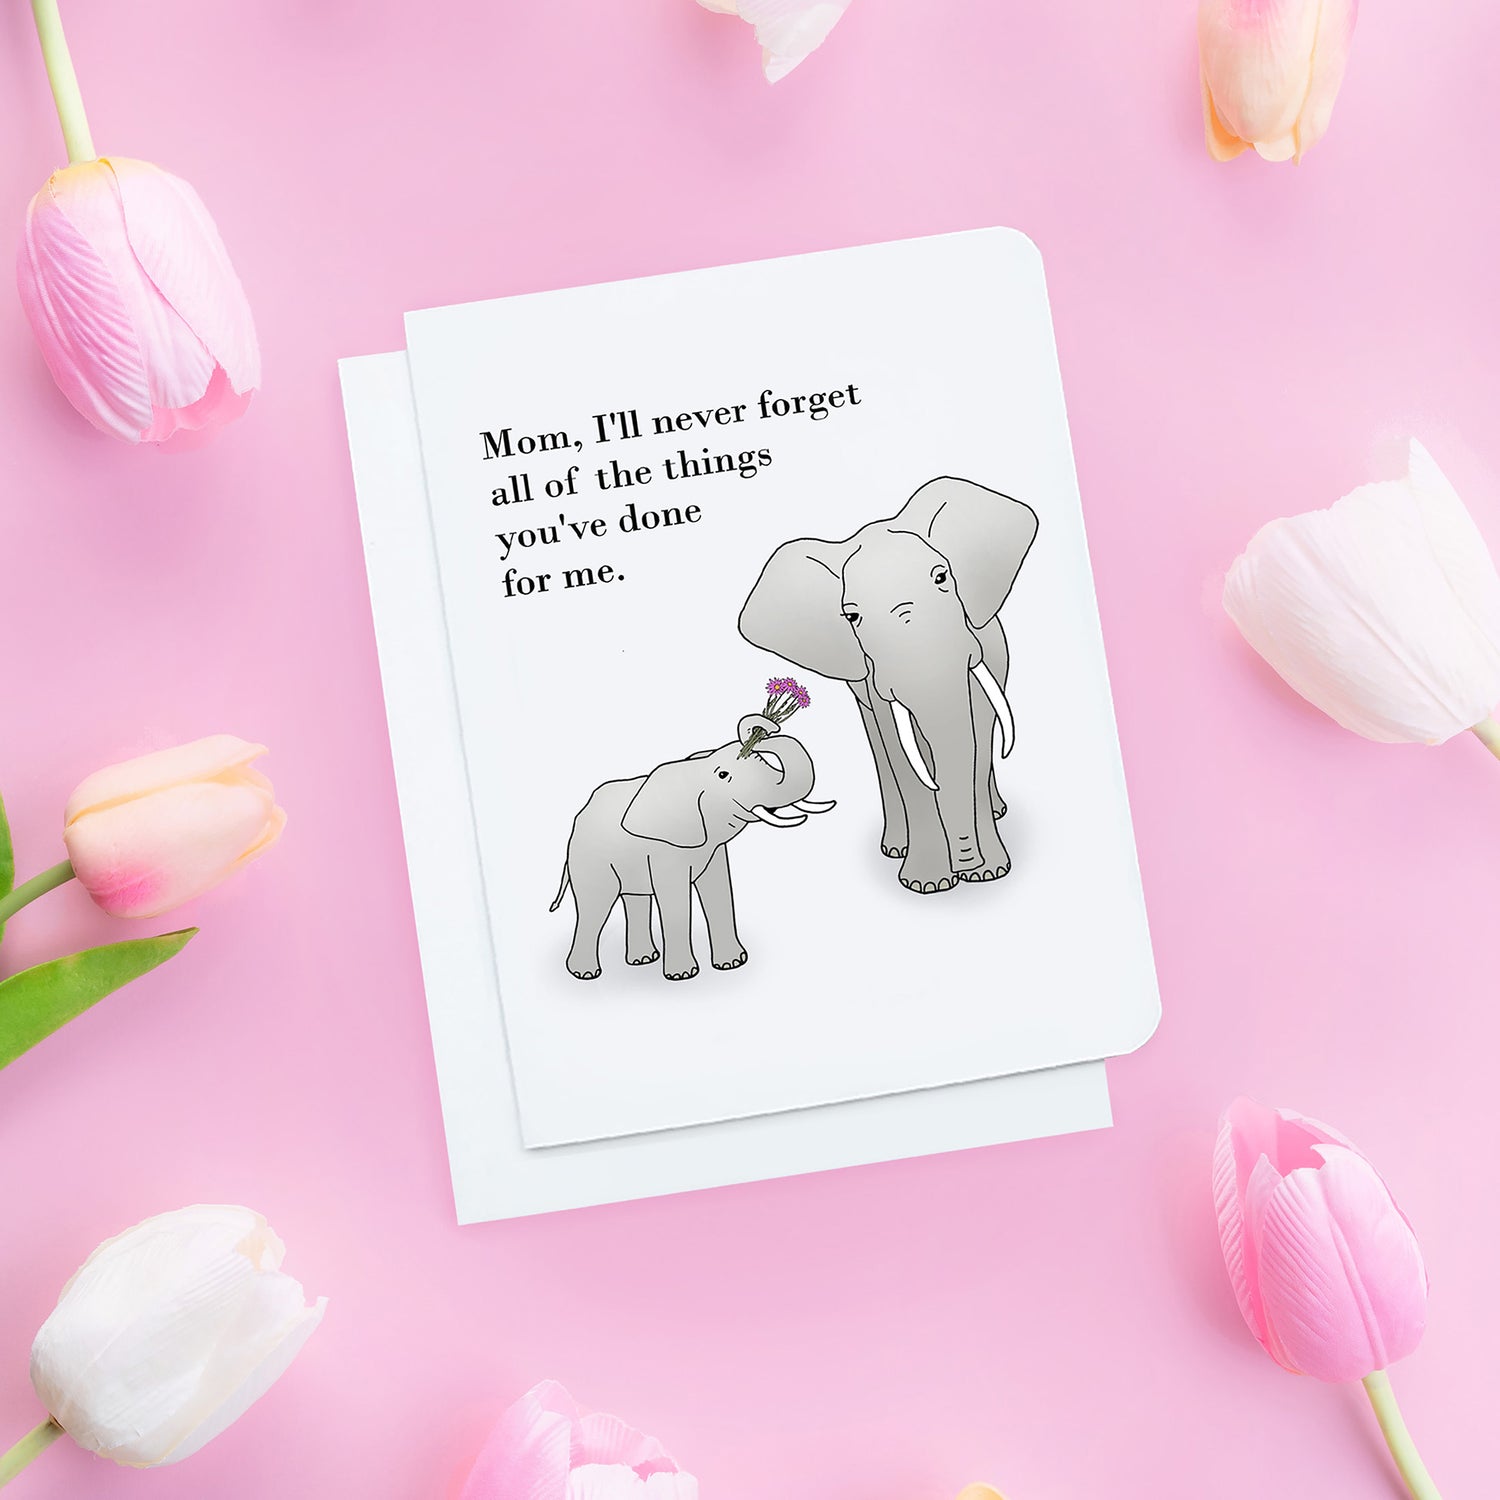 A Mothers Day Card. It has a small elephant holding up flowers in its trunk to a big elephant. Text reads, Mom, I'll never forget all of the things you've done for me.